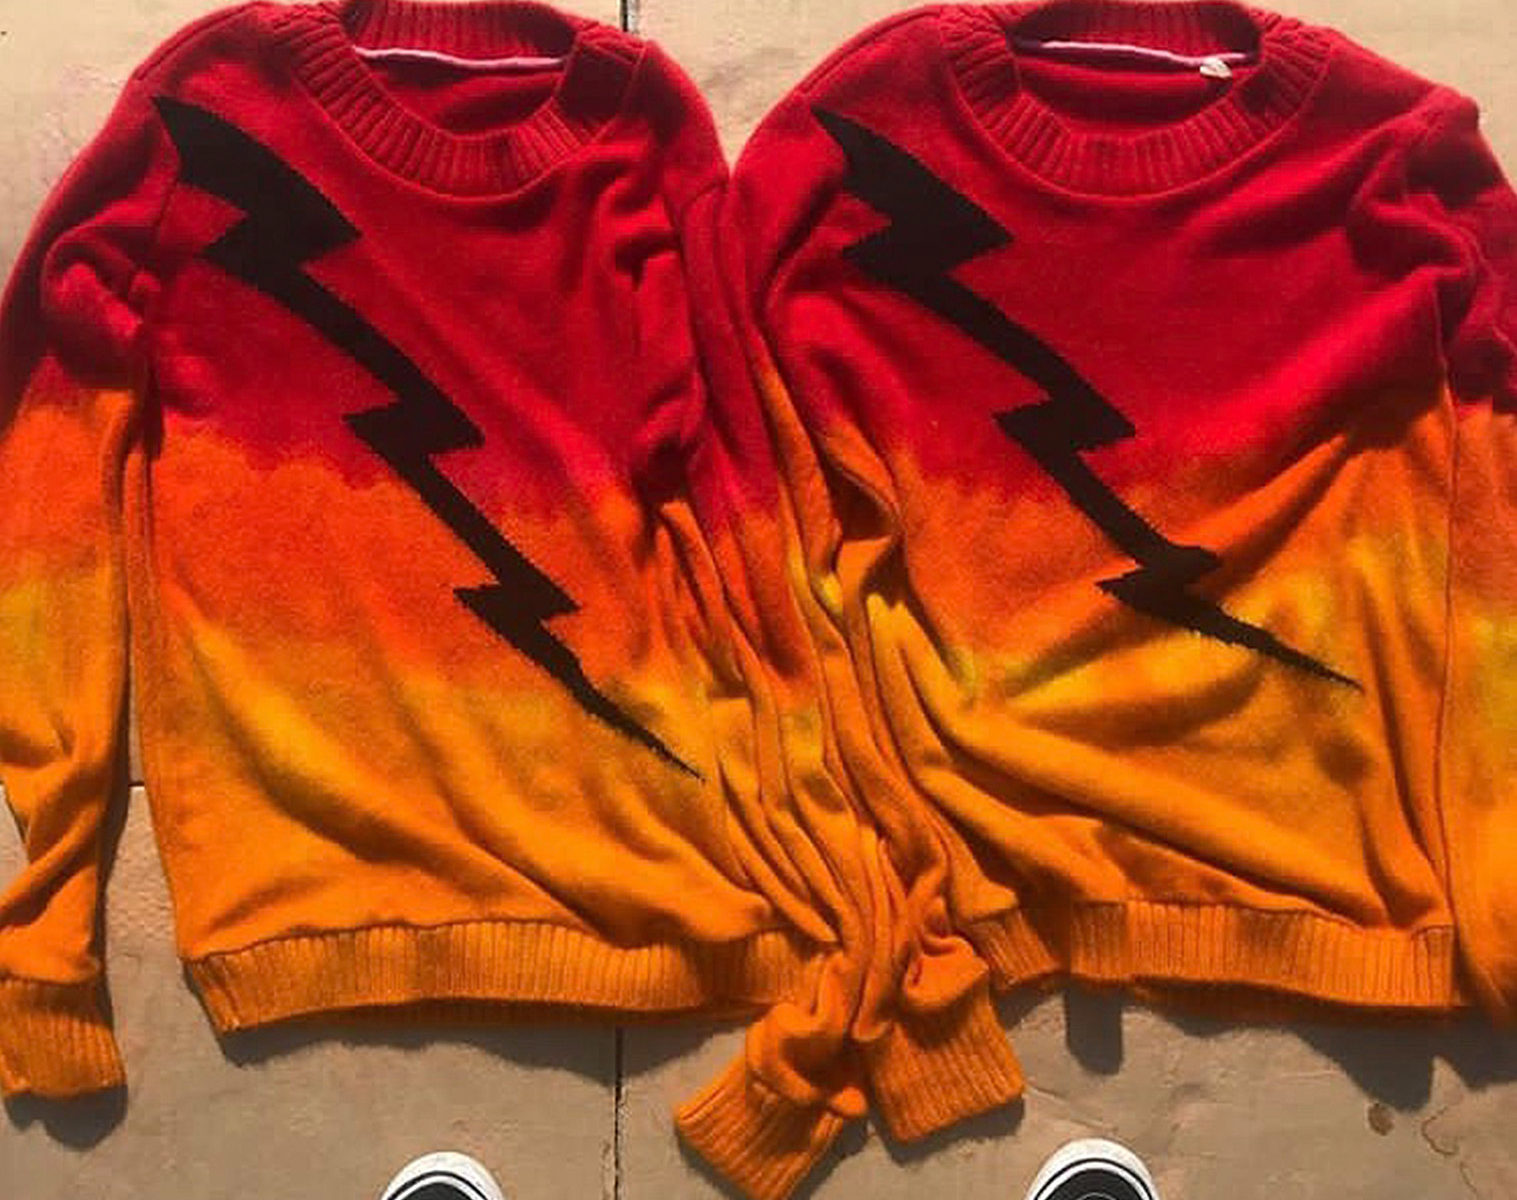 THE ELDER STATESMAN Intarsia Gradient Dyed Front Painted Lightning Bolt Sweater 1